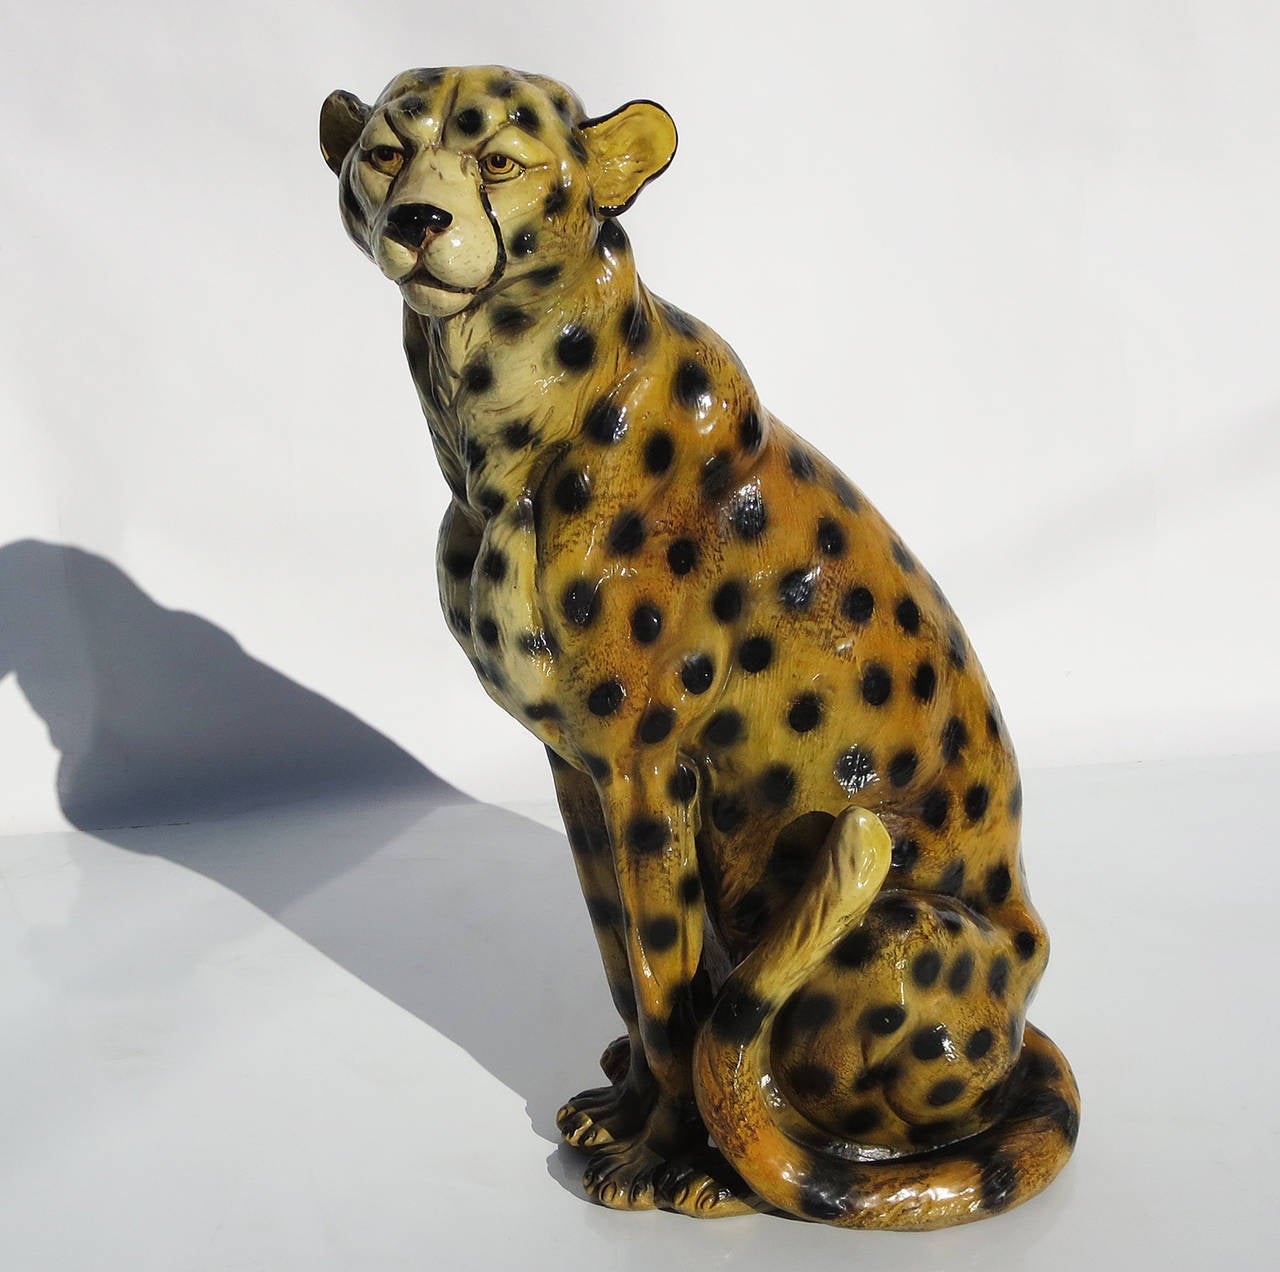 A lovely feline sculpture, hand decorated and glazed. The leopard is created in a hollowed resin, so it is manageable in weight, but not prone to cracking or damage. It can even be used outside, if desired. The jungle cat is in fine original